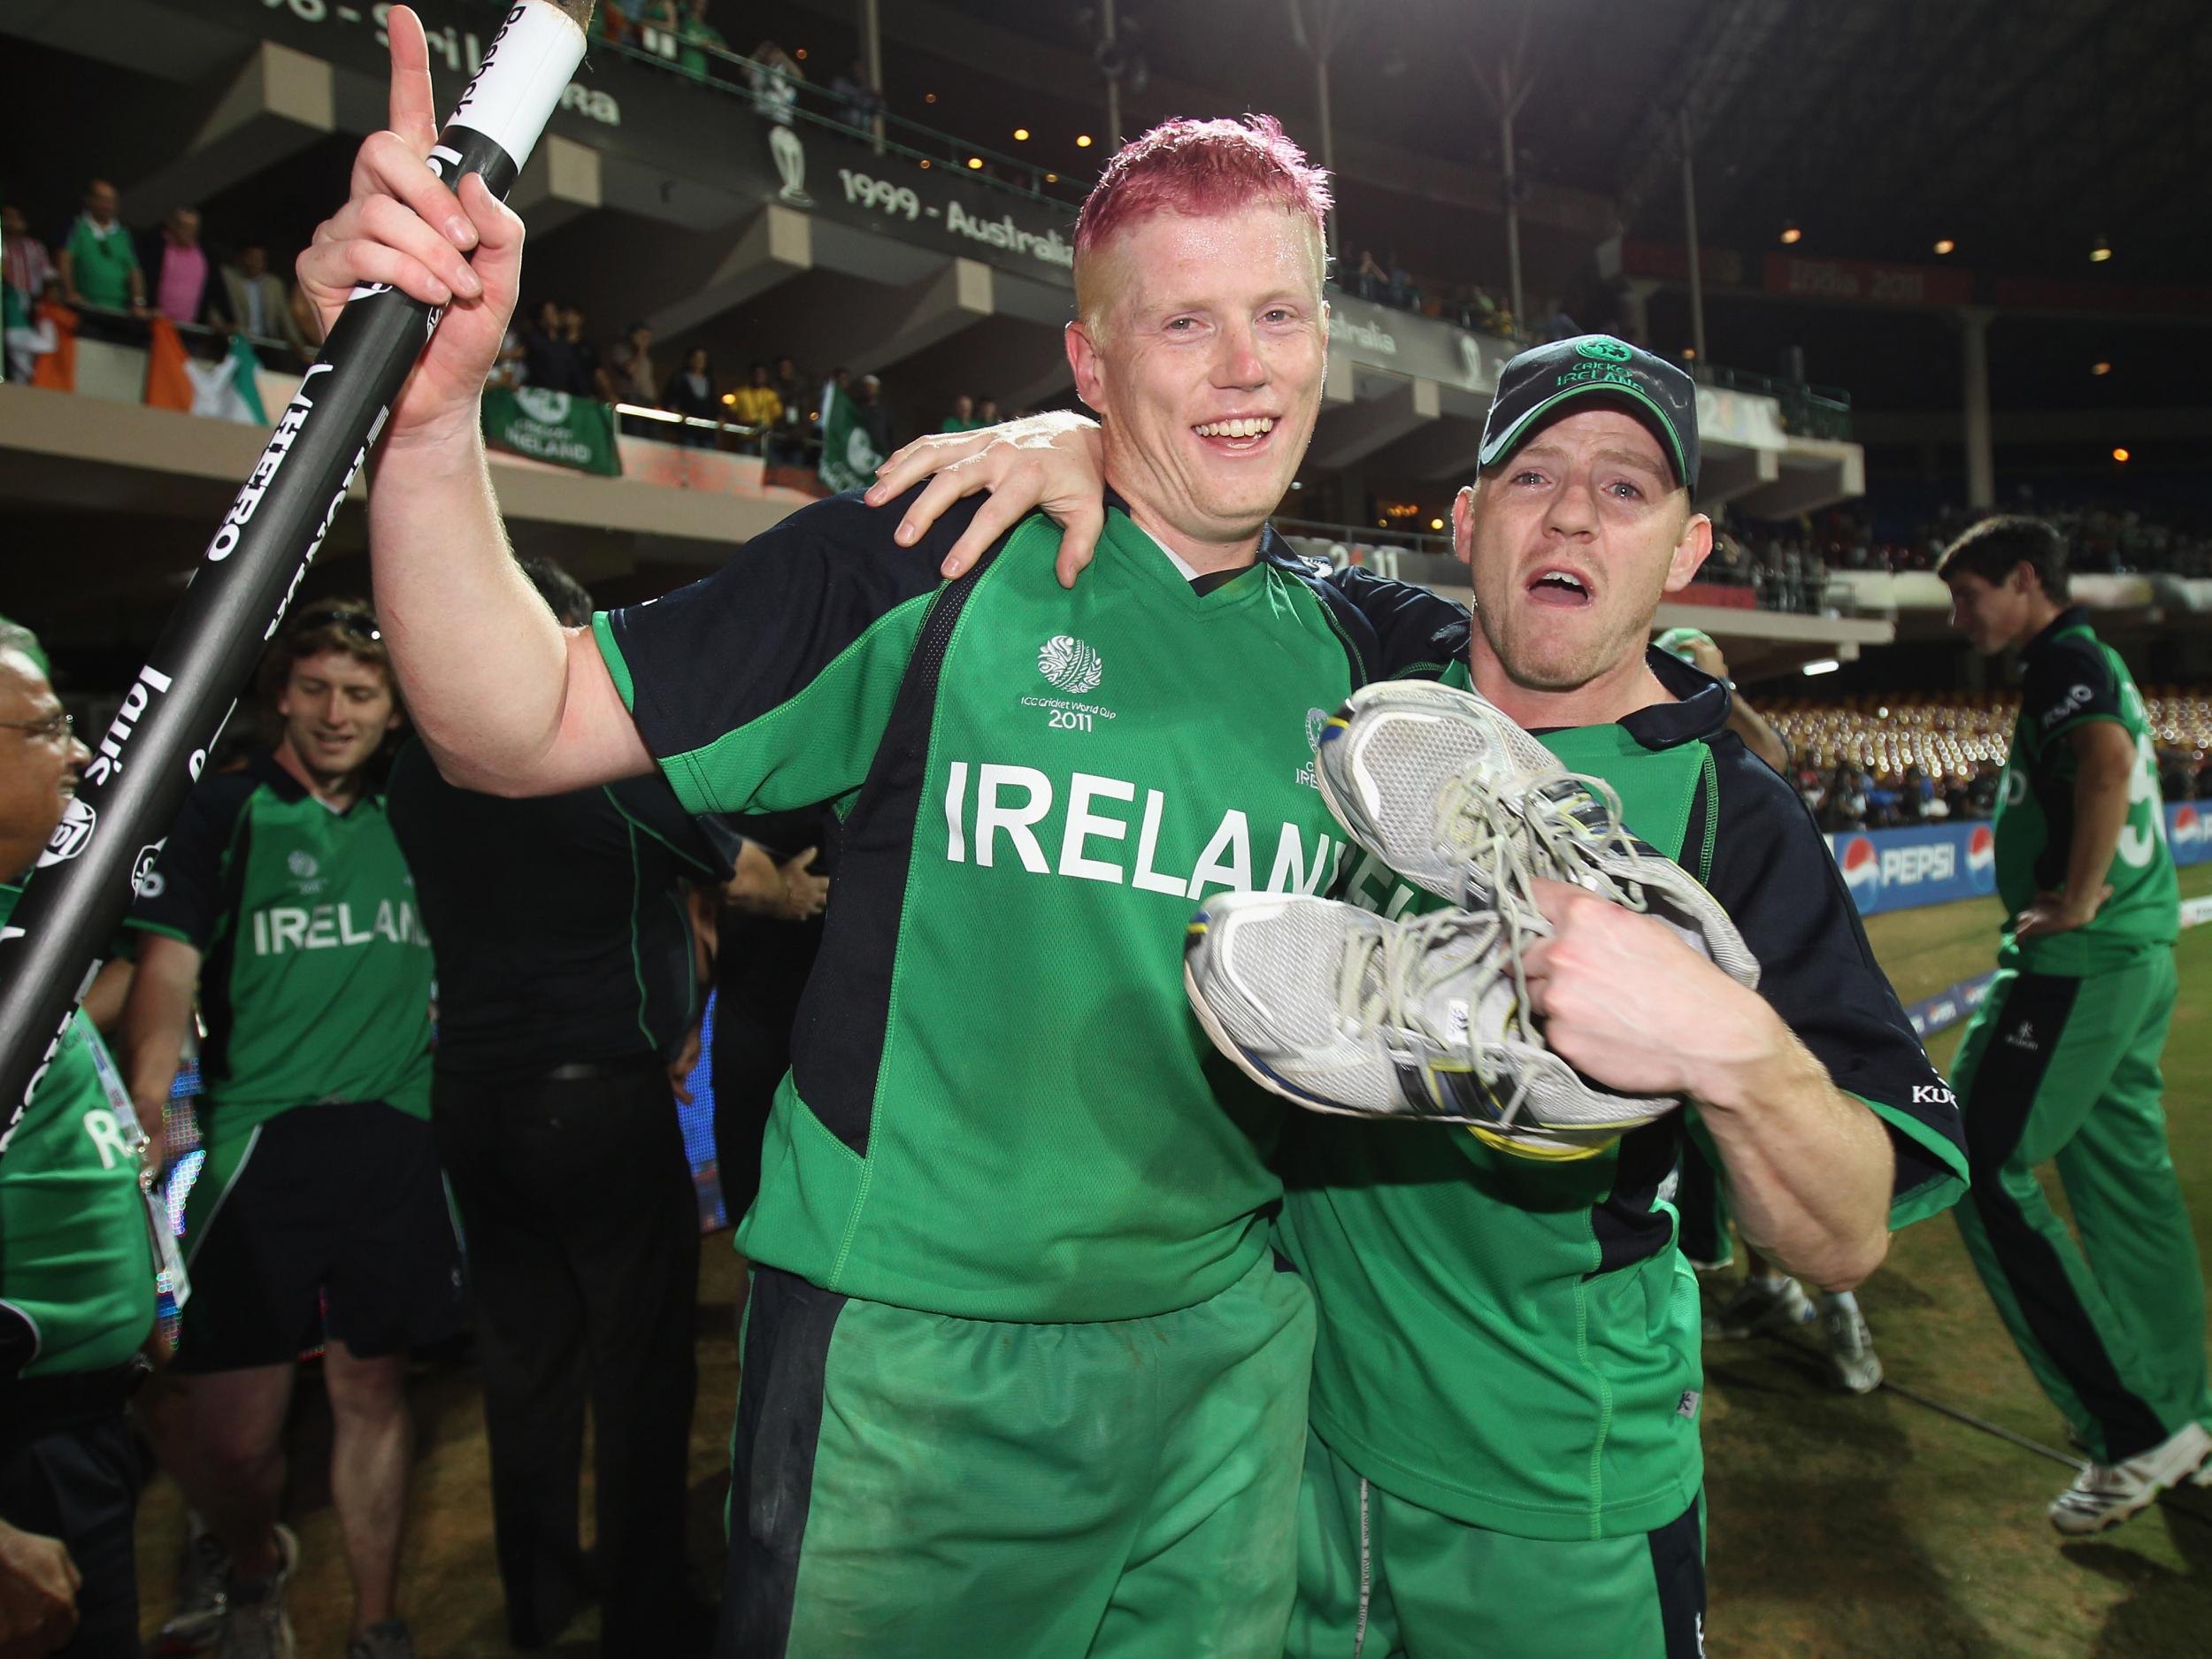 Ireland recorded a famous victory over England in 2011